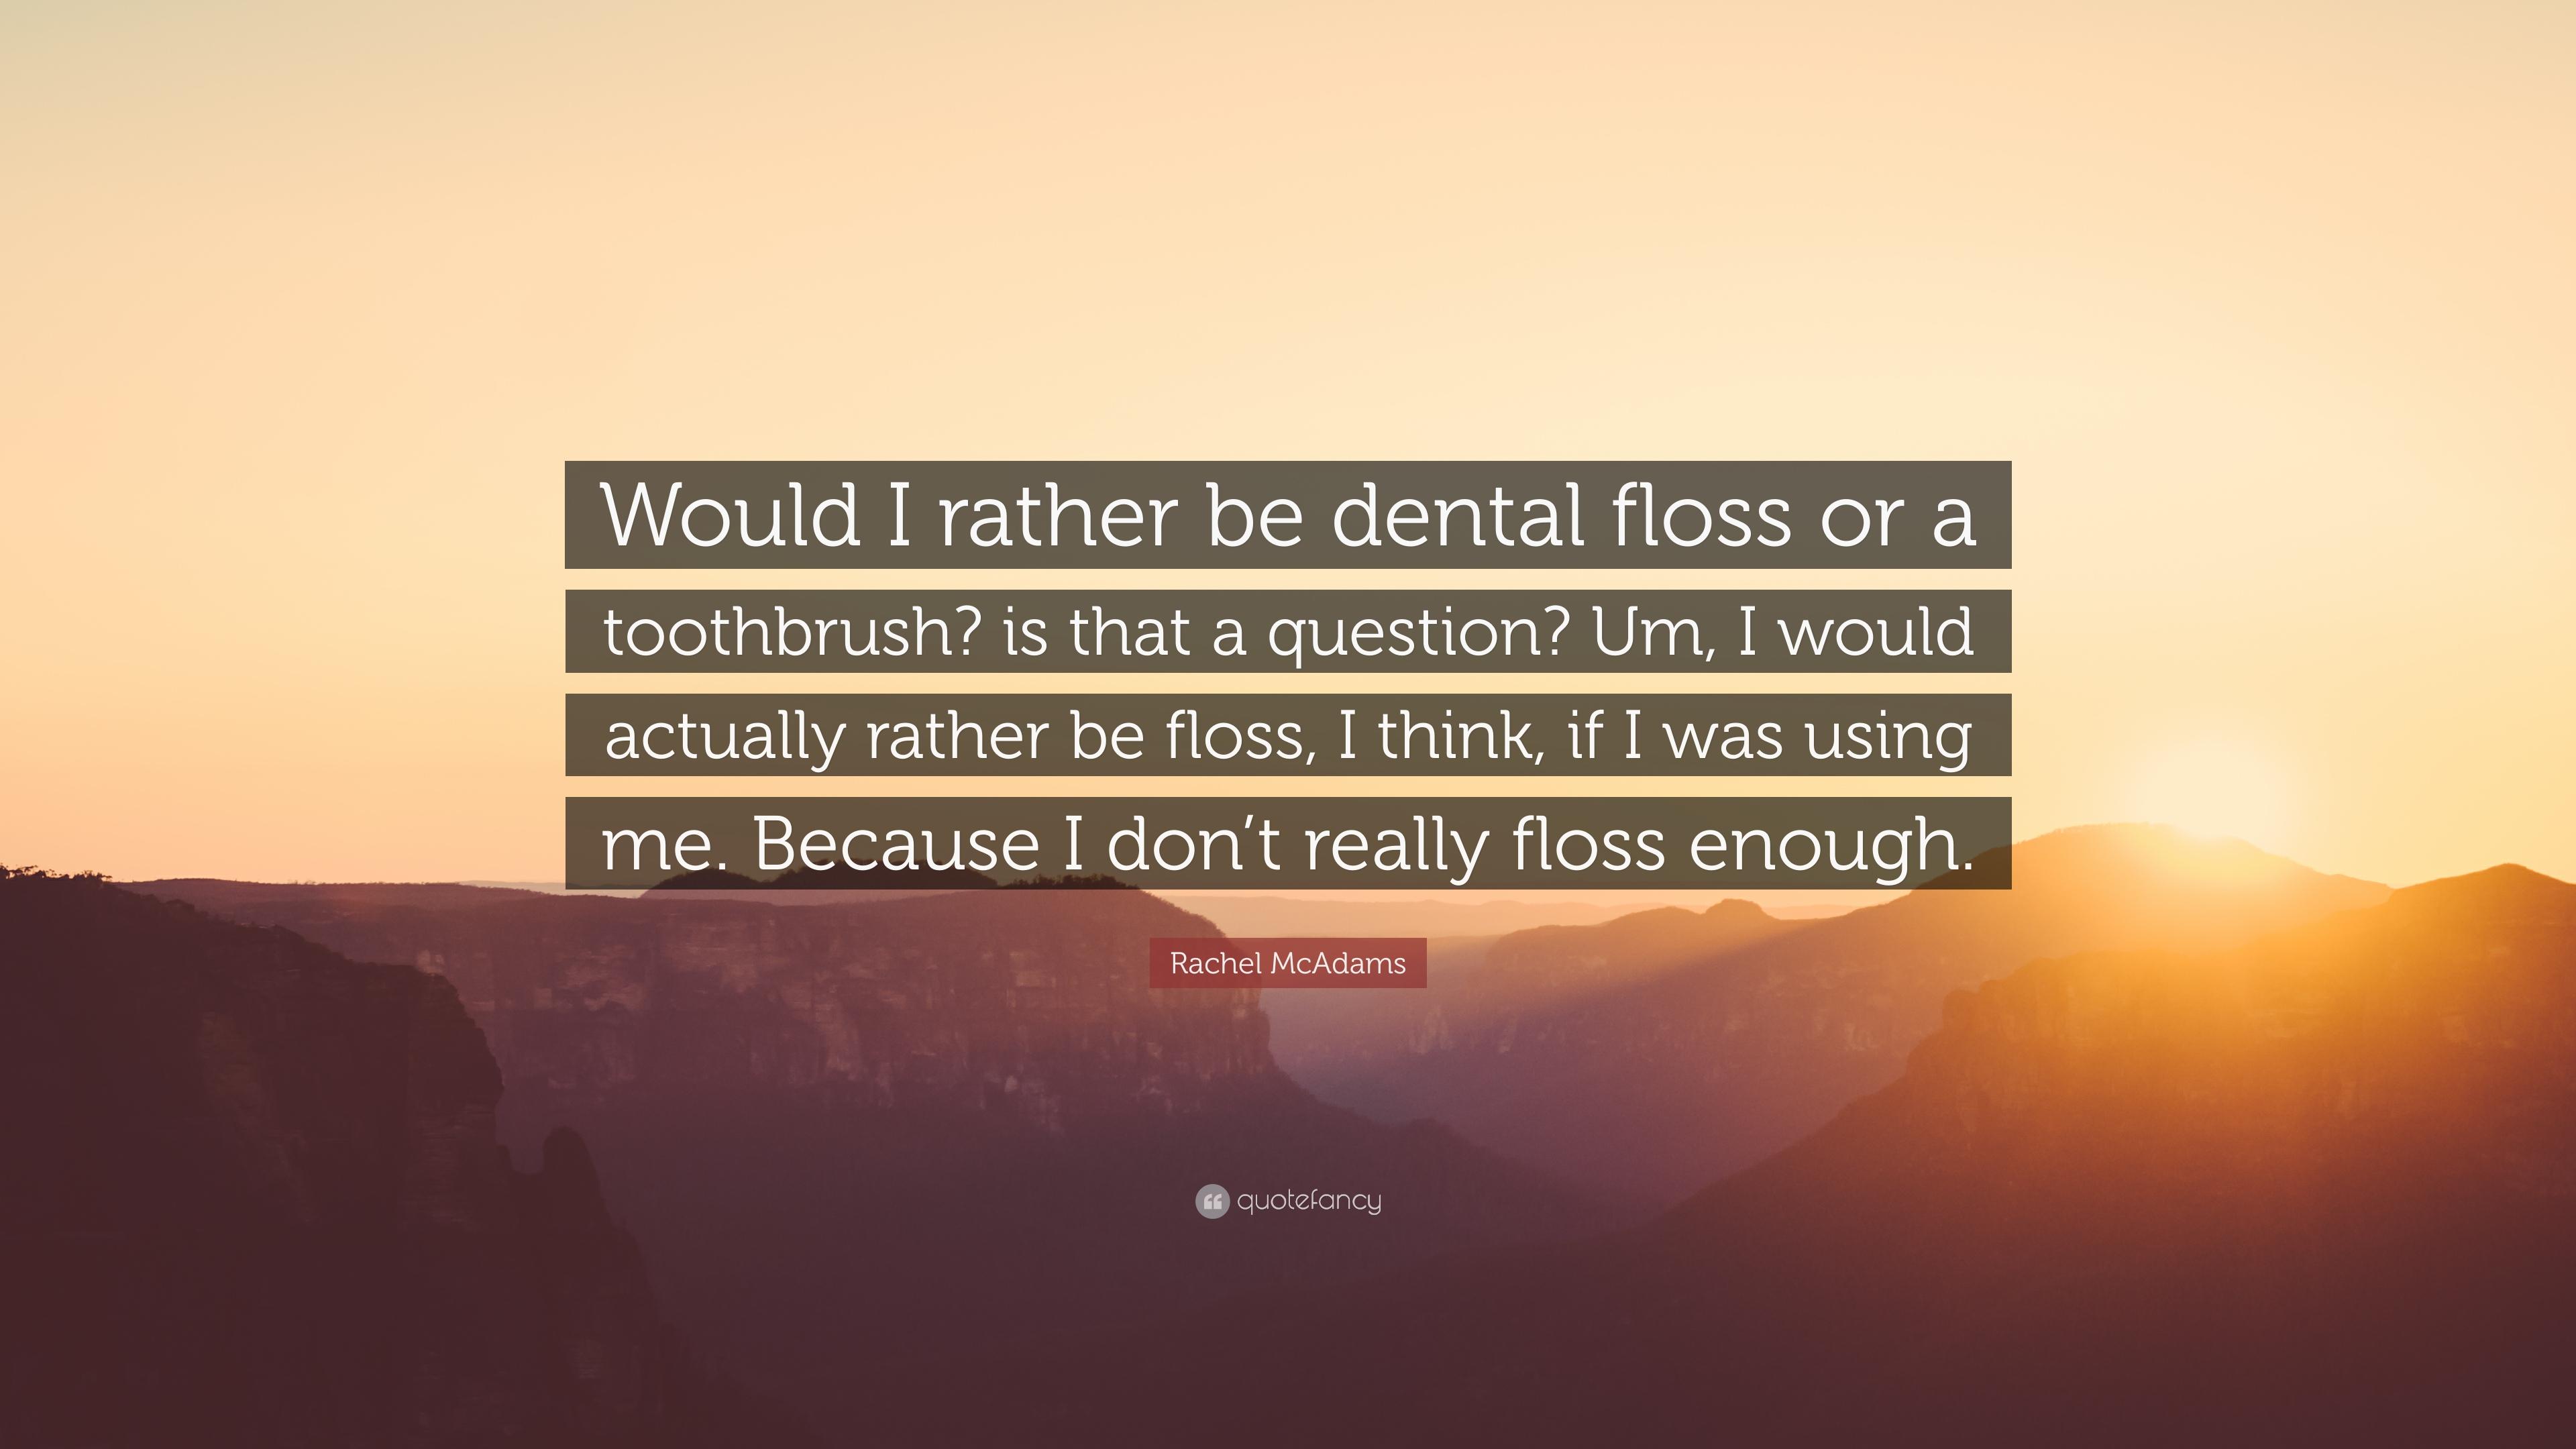 Rachel McAdams Quote: “Would I rather be dental floss or a